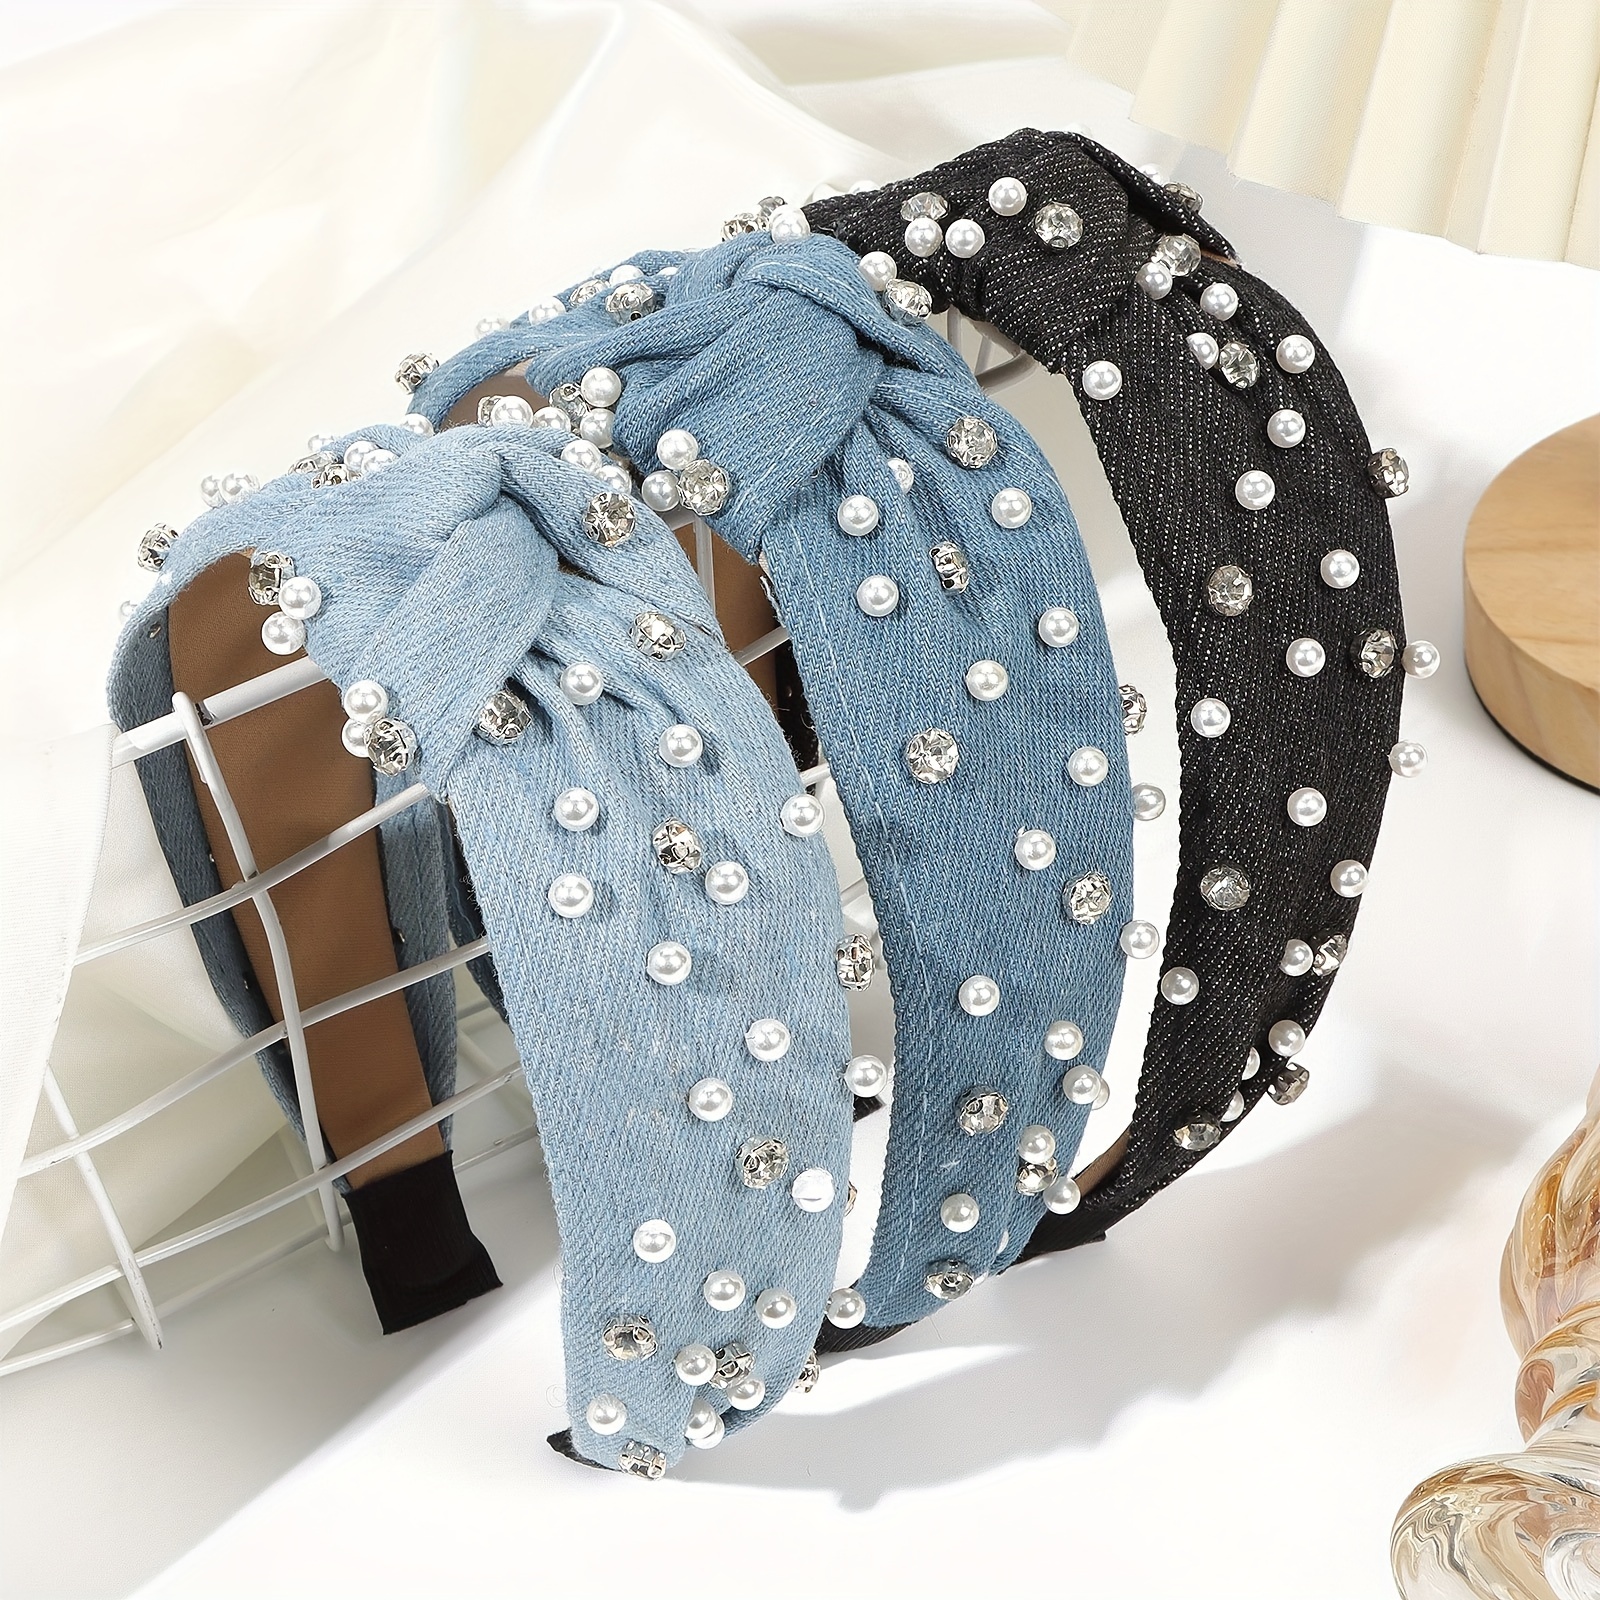 

Denim Headband Cross Top Knot Hair Bands Faux Pearls Rhinestones Decor Hairband Hair Accessories Twisted Knotted Head Wrap